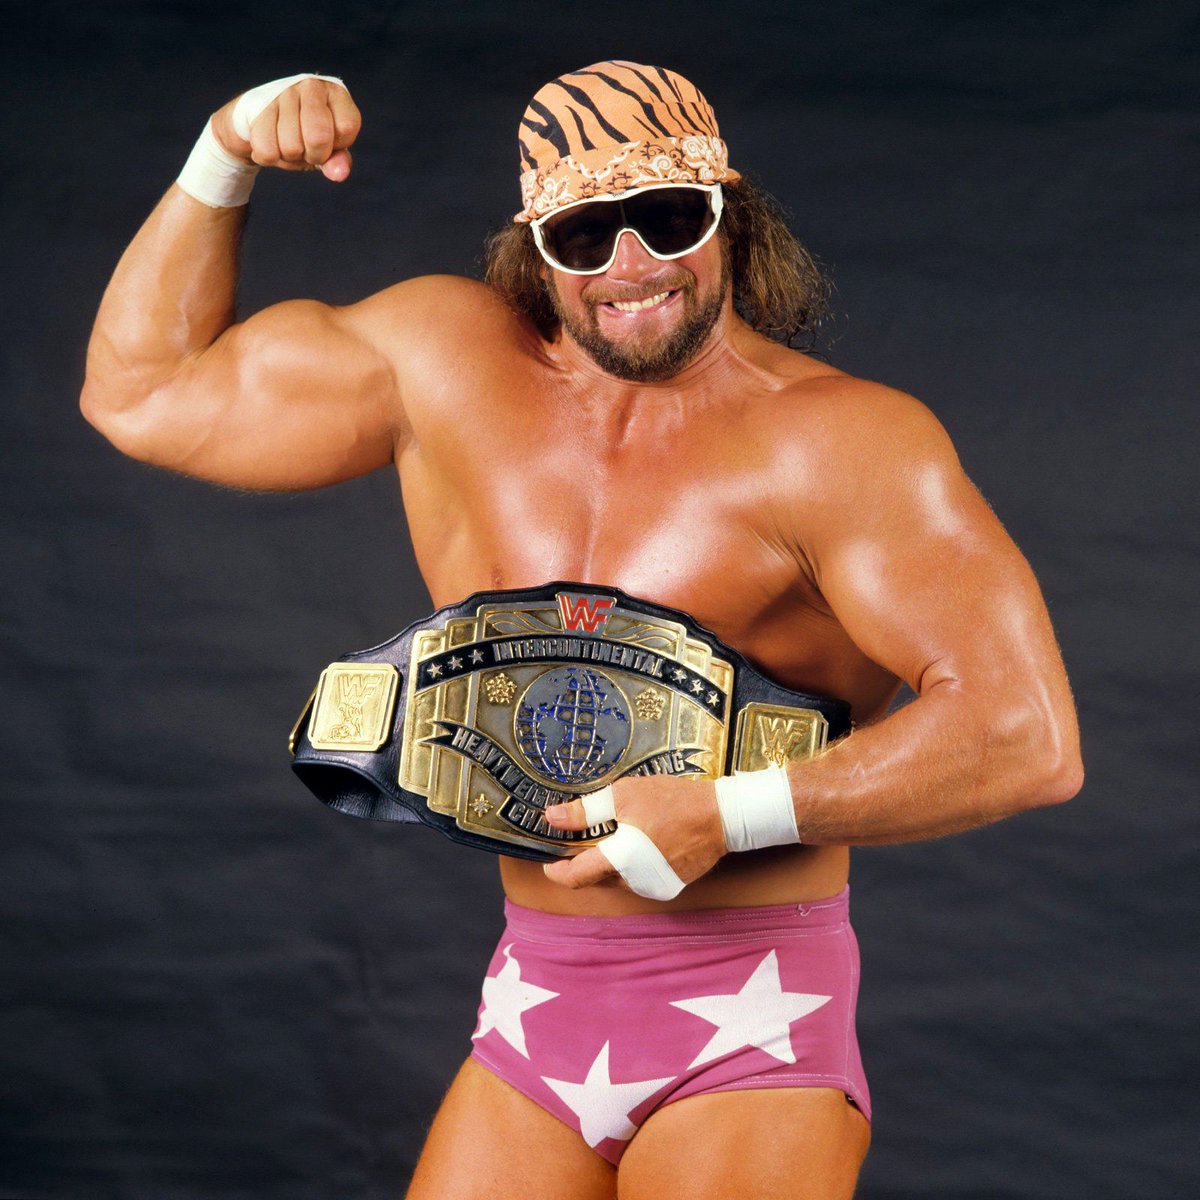 Intercontinental Champion of the day: 'Macho Man' Randy Savage - His Intercontinental title reign lasted 414 days from February 8, 1986 until March 29, 1987. 🏆 #WWF #WWE #Wrestling #RandySavage